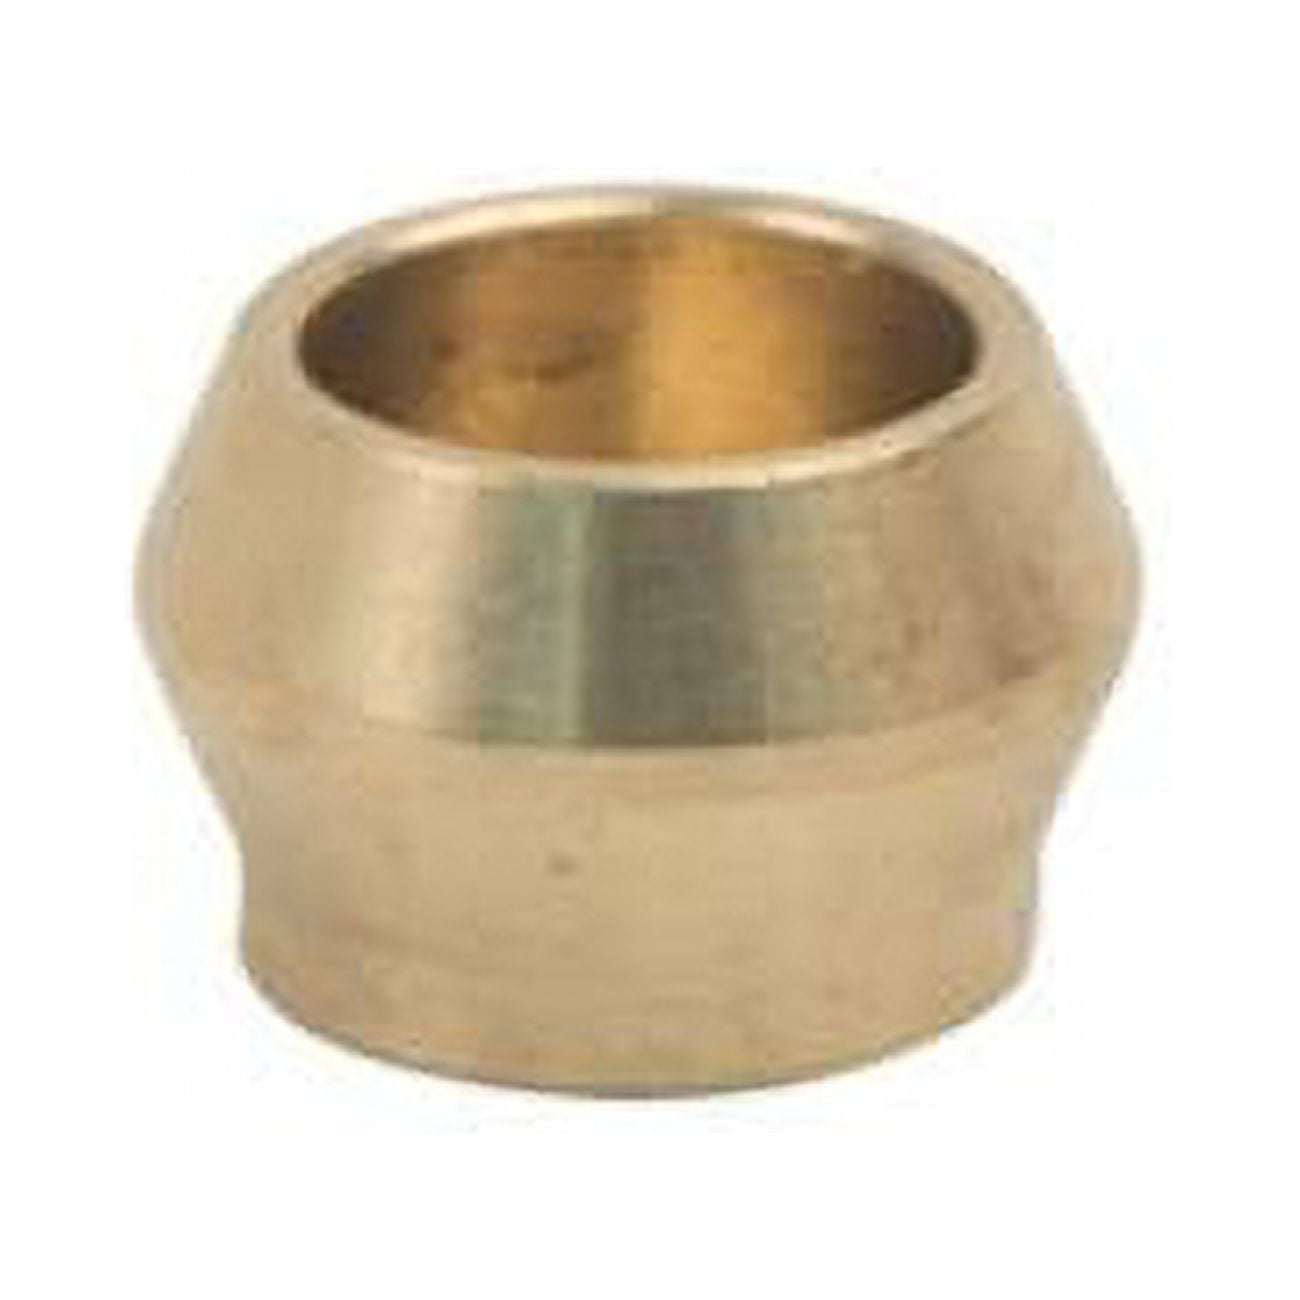 UPC 026613176802 product image for 4905865 0.5 in. Compression x 0.5 in. Dia. Compression Brass Plug | upcitemdb.com